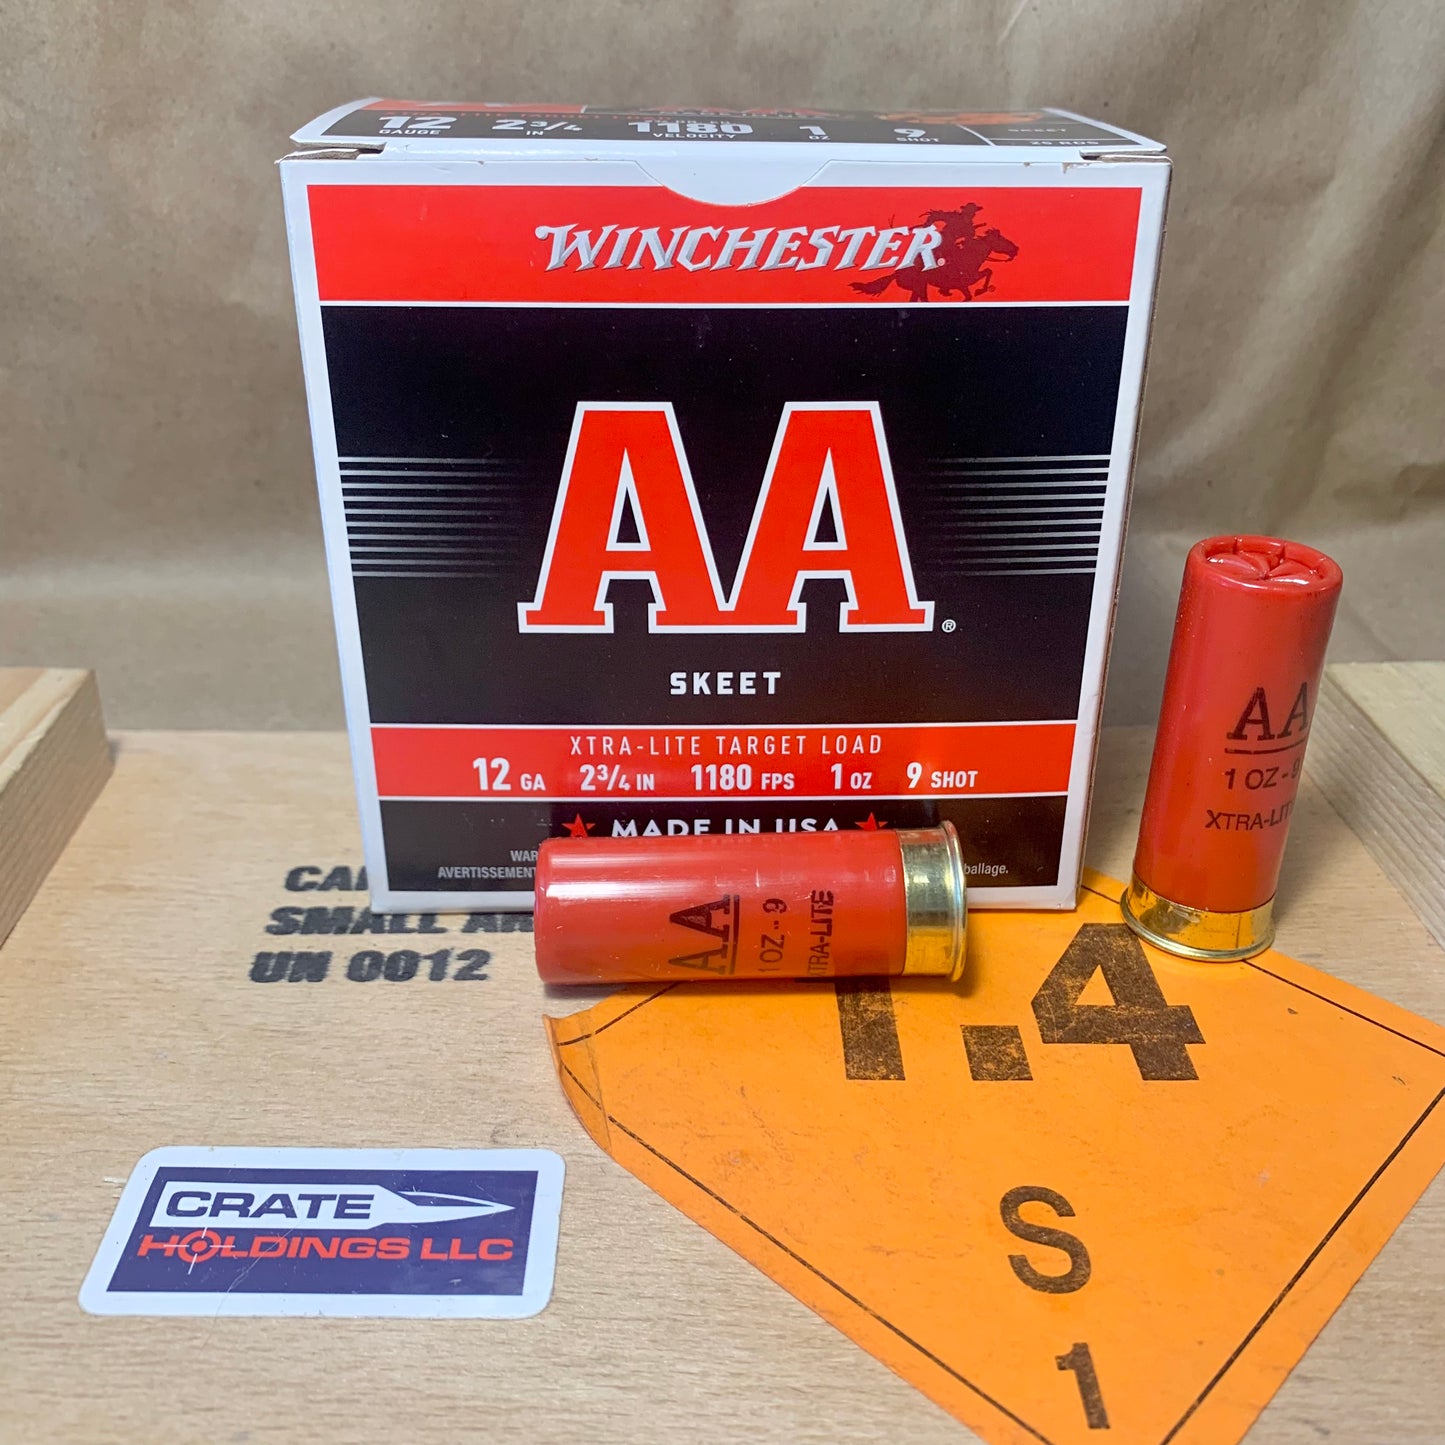 25 Rounds Box Winchester AA 12 Gauge Ammo 2 3/4” #9